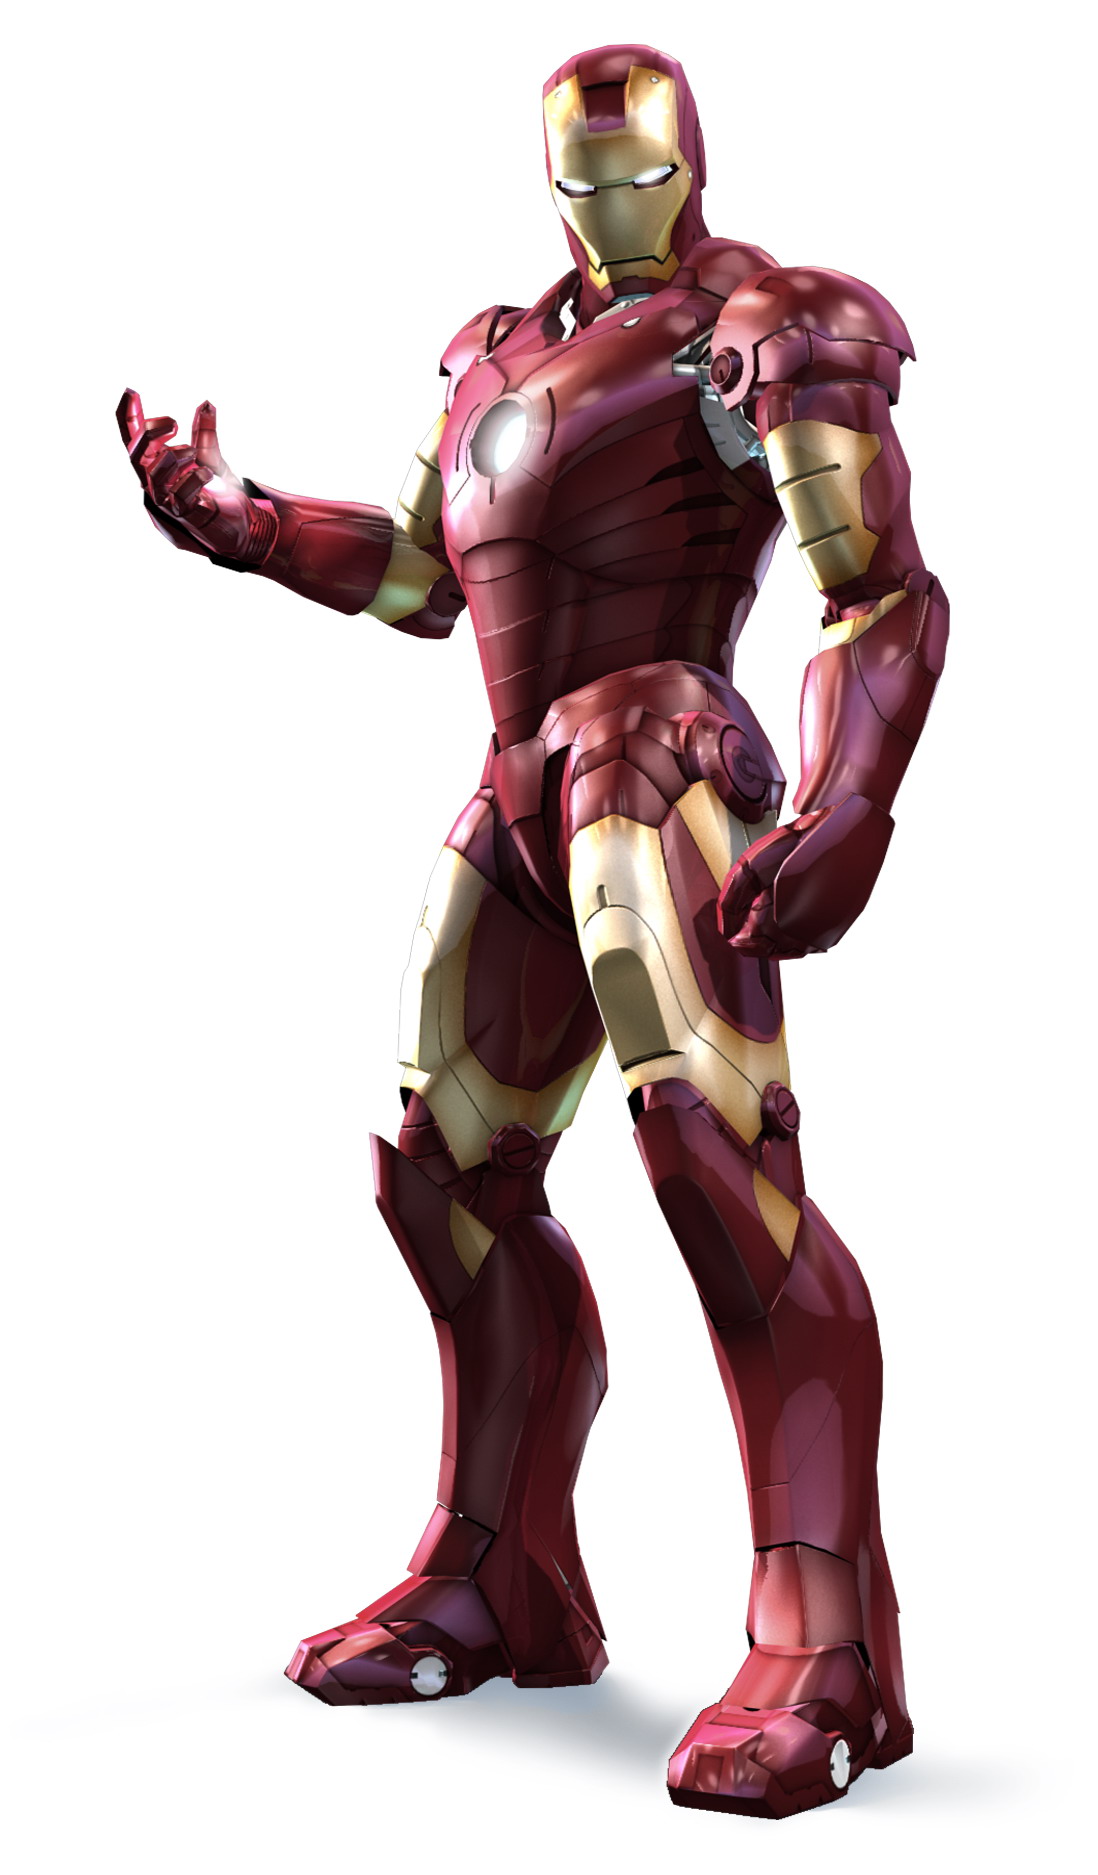 whats your favourite iron man suit